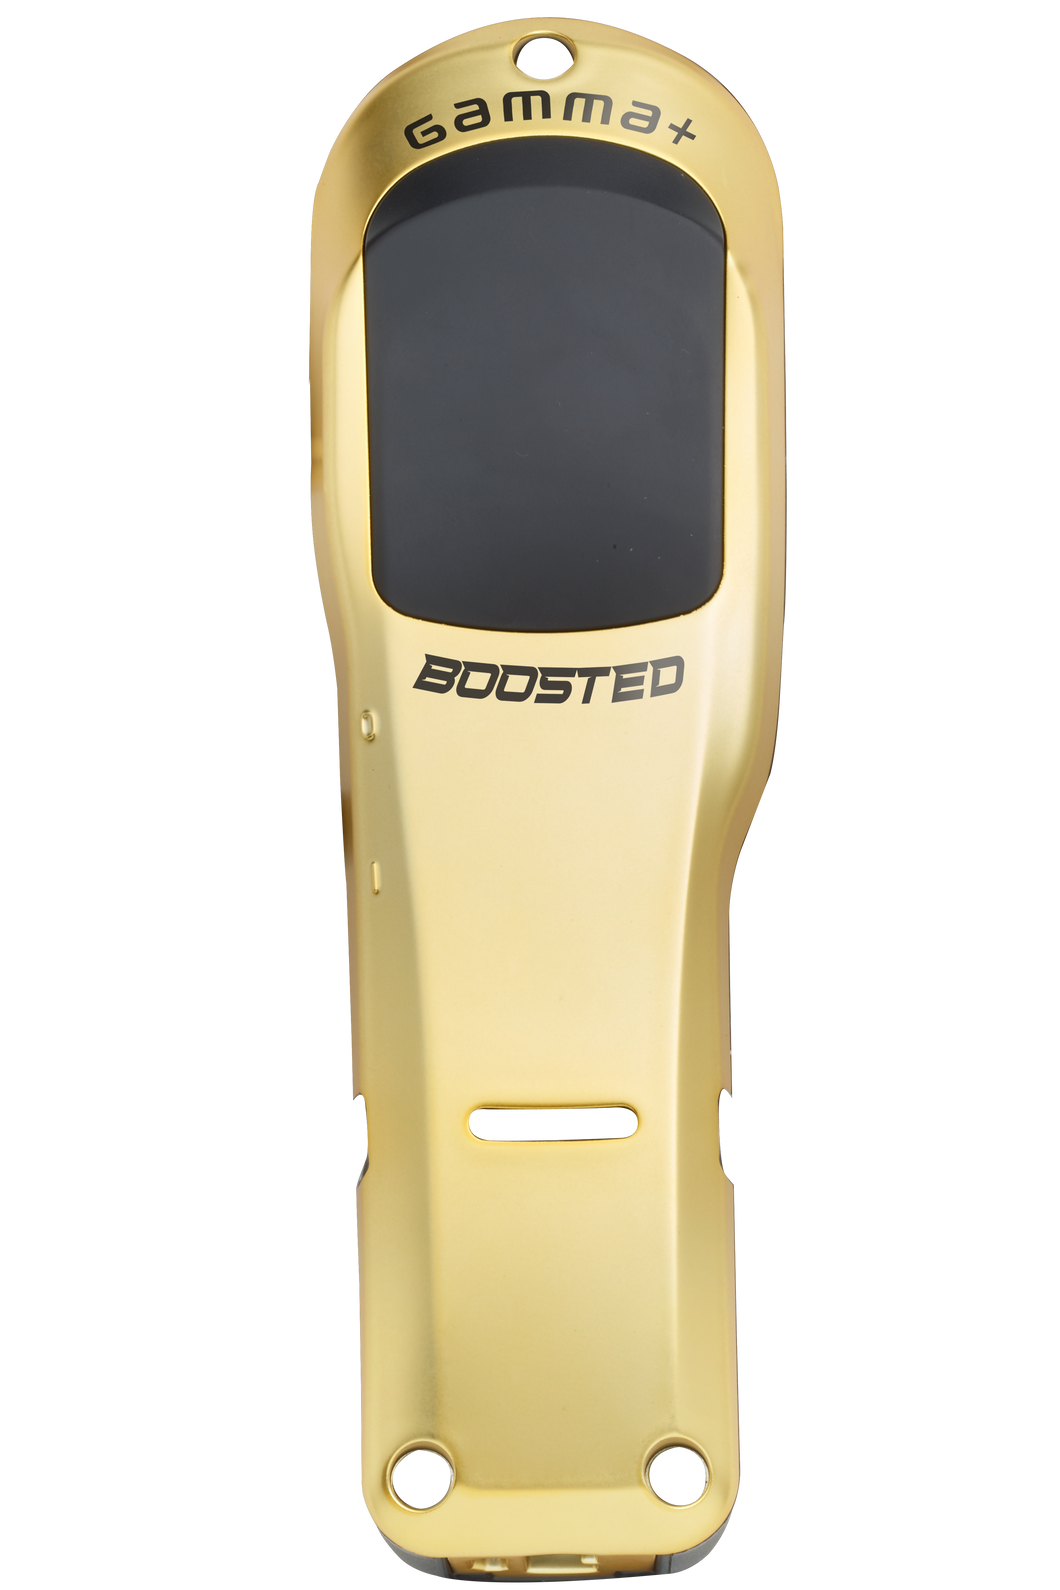 Gamma+ Replacement Boosted Clipper Lid - Gold